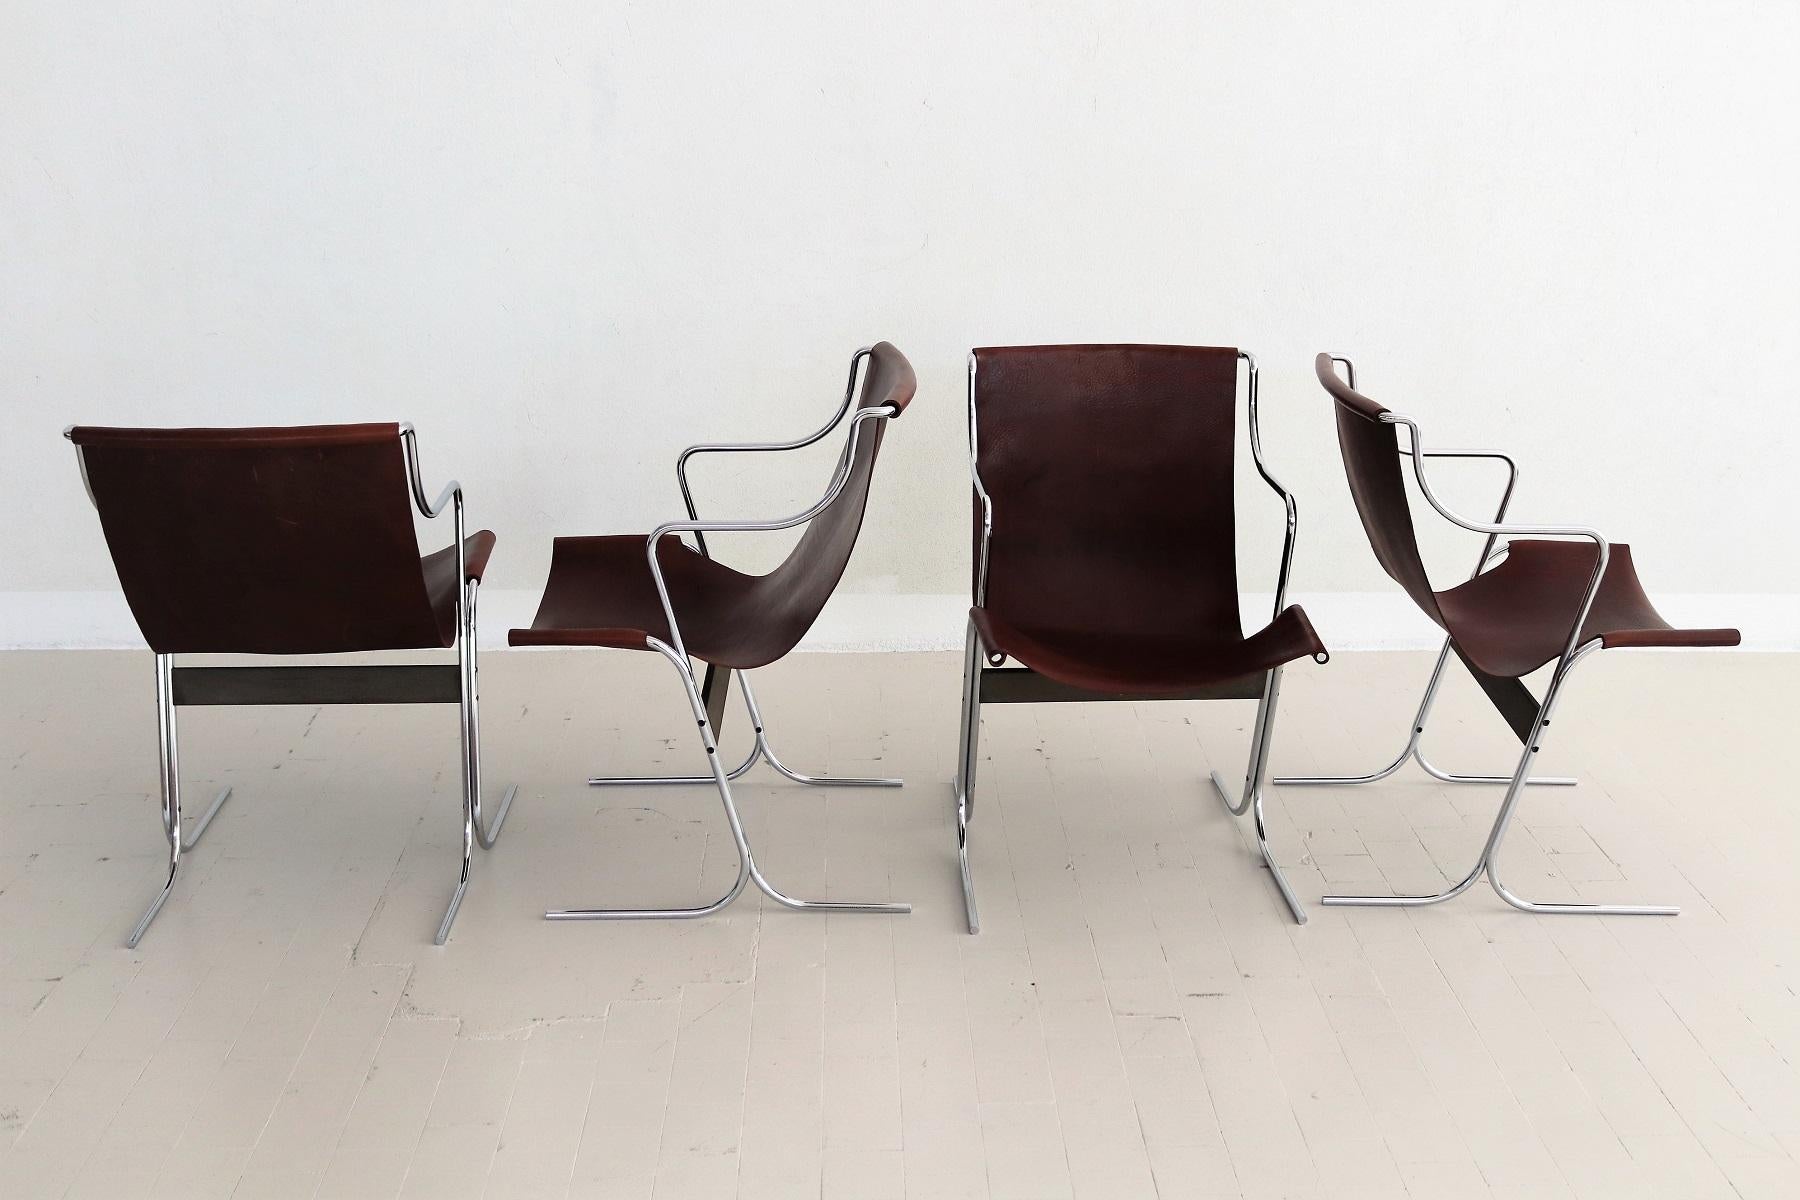 Italian Midcentury Set of Four Lounge Chairs by Ross Littell for ICF Milan, 1960 For Sale 1